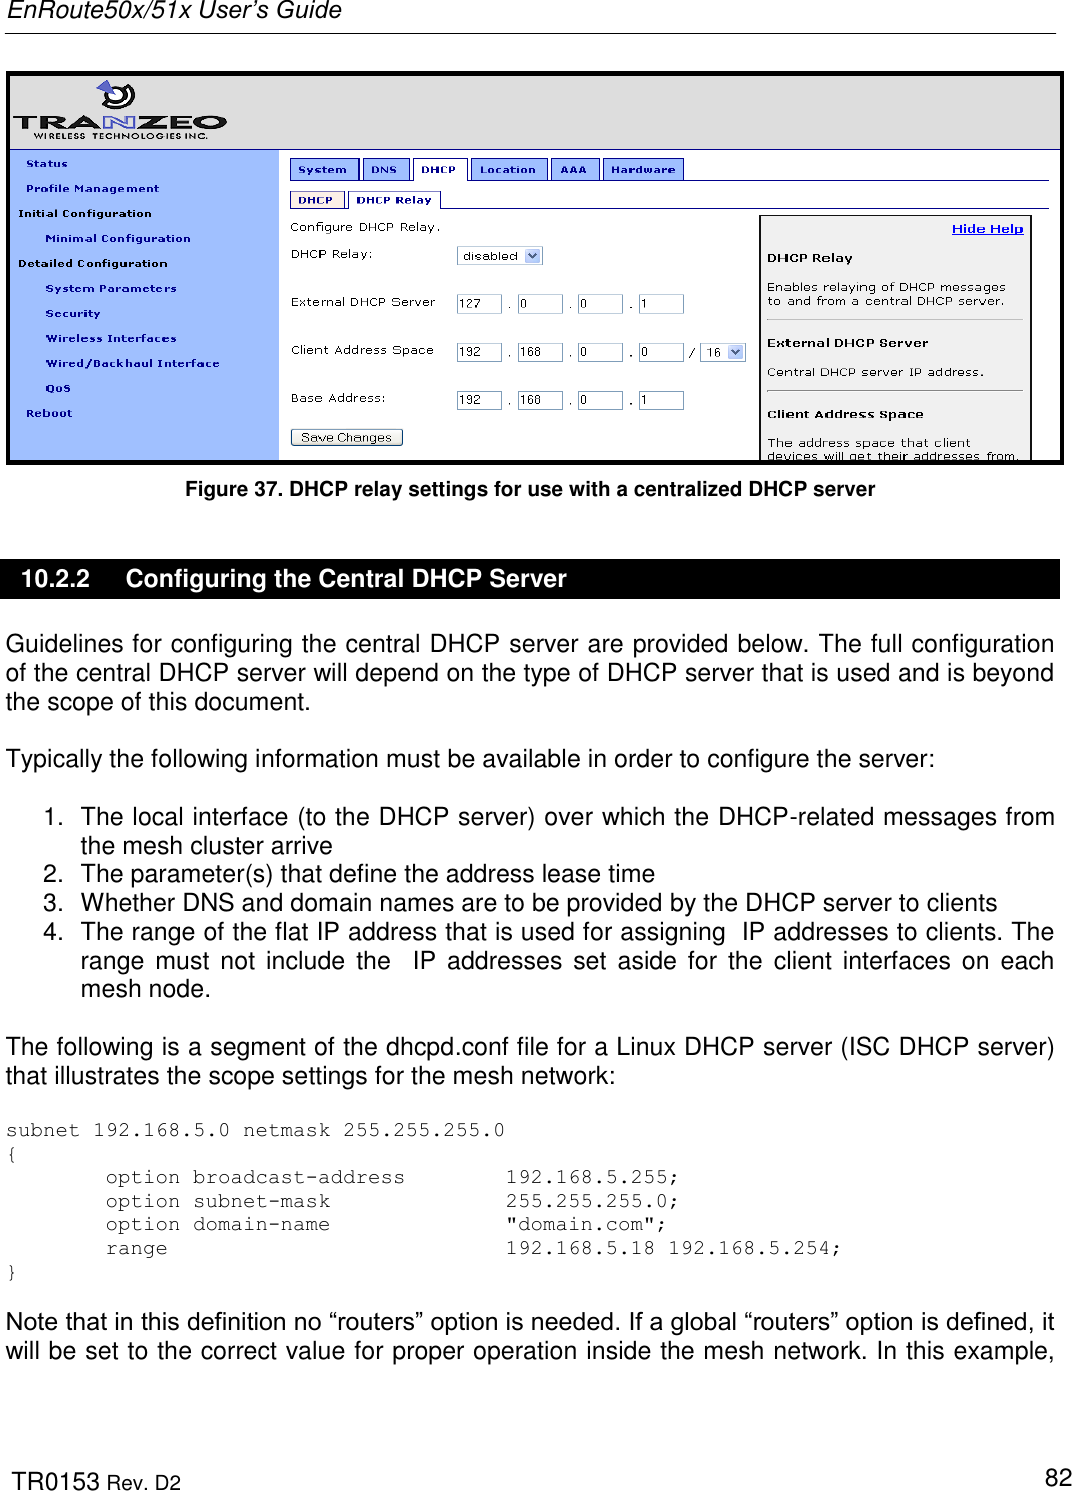 EnRoute50x/51x User’s Guide  TR0153 Rev. D2   82  Figure 37. DHCP relay settings for use with a centralized DHCP server 10.2.2  Configuring the Central DHCP Server Guidelines for configuring the central DHCP server are provided below. The full configuration of the central DHCP server will depend on the type of DHCP server that is used and is beyond the scope of this document.   Typically the following information must be available in order to configure the server:  1.  The local interface (to the DHCP server) over which the DHCP-related messages from the mesh cluster arrive 2.  The parameter(s) that define the address lease time  3.  Whether DNS and domain names are to be provided by the DHCP server to clients 4.  The range of the flat IP address that is used for assigning  IP addresses to clients. The range  must  not  include  the   IP  addresses set  aside for the  client  interfaces  on  each mesh node.  The following is a segment of the dhcpd.conf file for a Linux DHCP server (ISC DHCP server) that illustrates the scope settings for the mesh network:  subnet 192.168.5.0 netmask 255.255.255.0 {         option broadcast-address        192.168.5.255;         option subnet-mask              255.255.255.0;         option domain-name              &quot;domain.com&quot;;         range                           192.168.5.18 192.168.5.254; }   Note that in this definition no “routers” option is needed. If a global “routers” option is defined, it will be set to the correct value for proper operation inside the mesh network. In this example, 